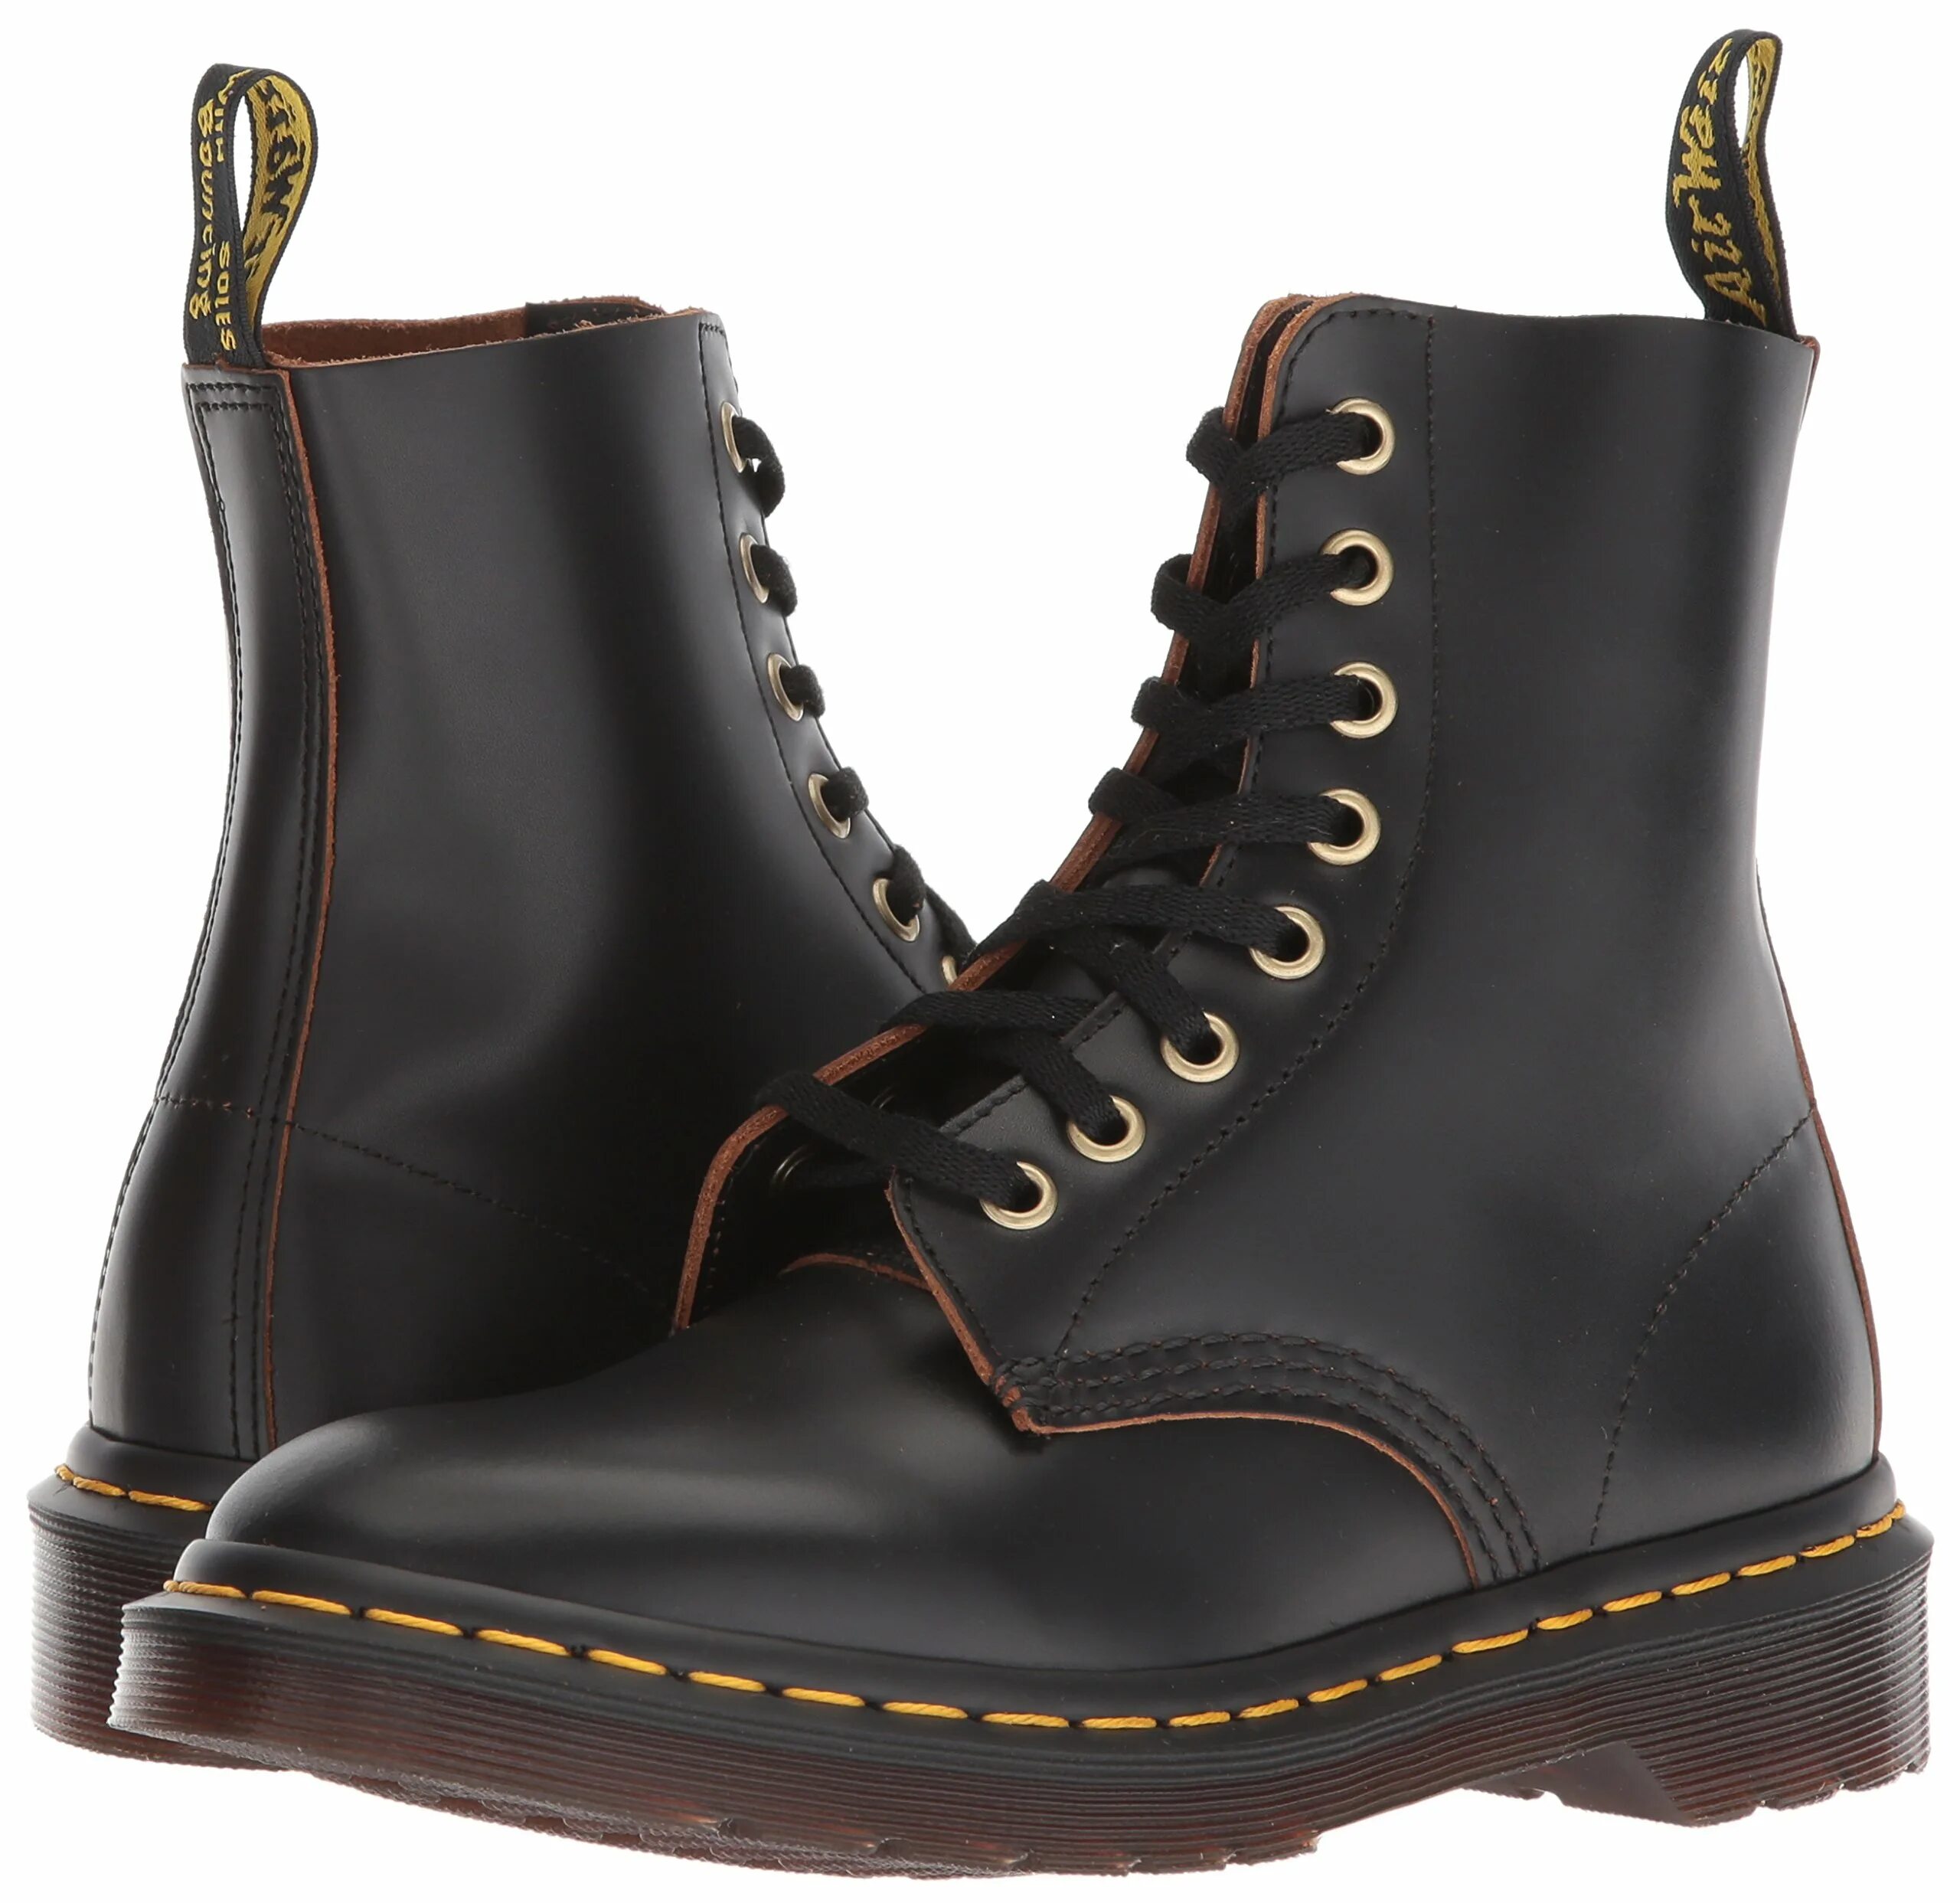 Dr Martens Antique Temperley 1460. Dr Martens 1460 Pascal подошва. Dr.Martens 1416 Pascal. Dr. Marten’s 1460 Vintage smooth Leather Lace up Boots..